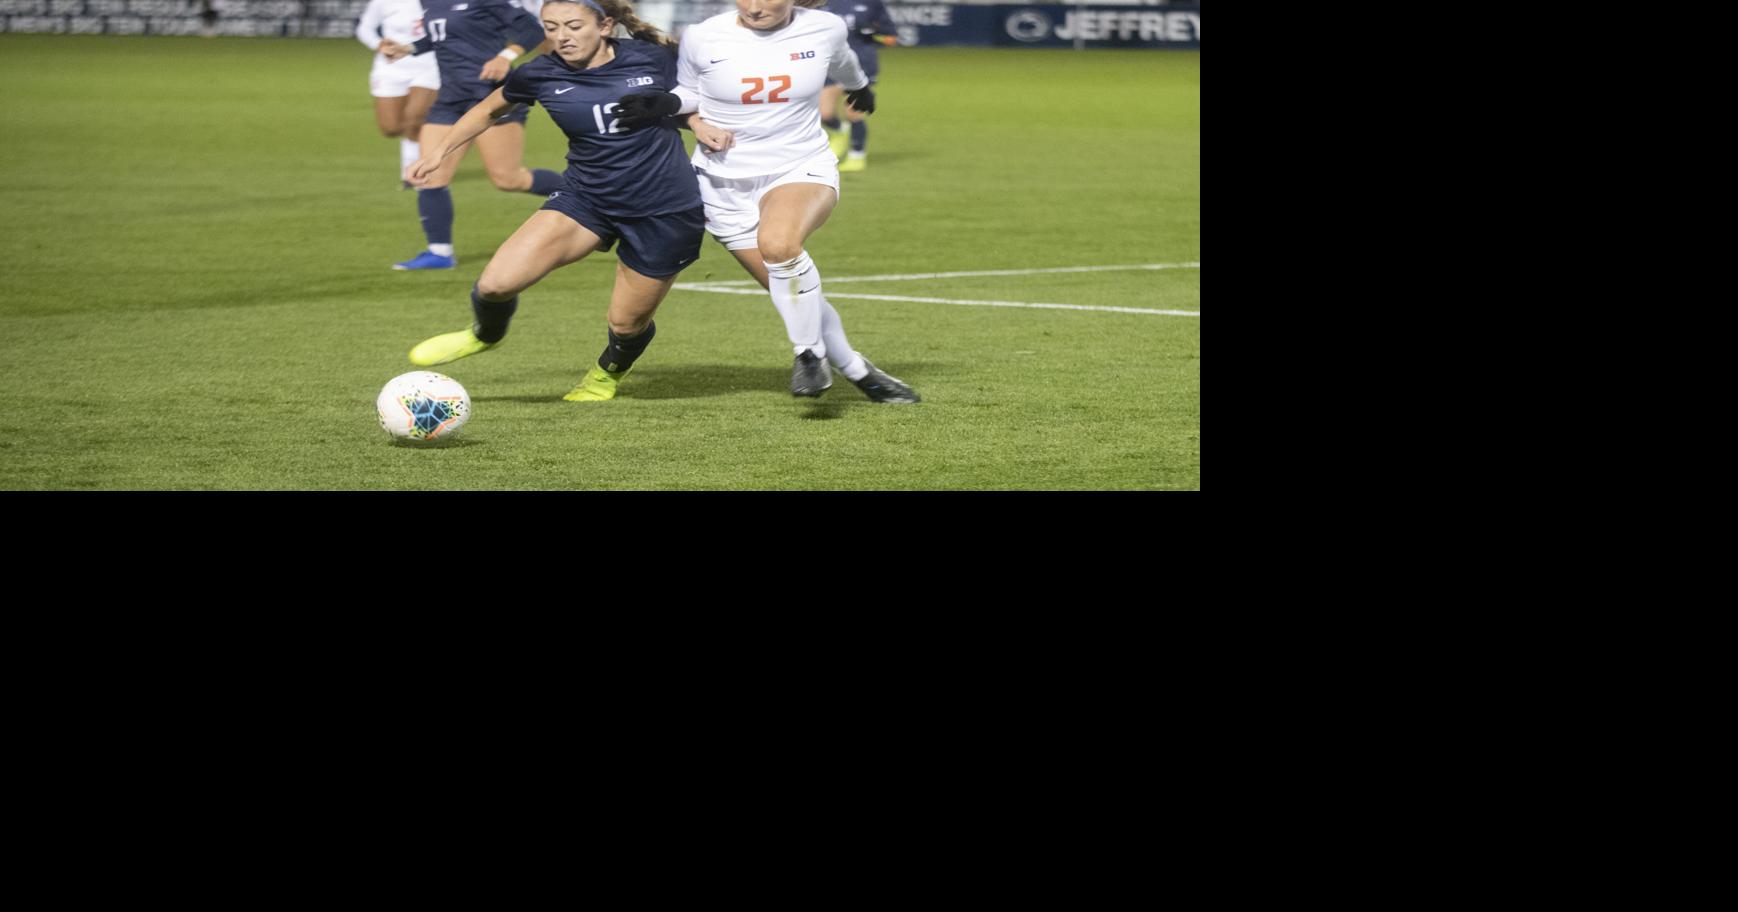 penn-state-women-s-soccer-dominates-illinois-on-senior-day-earns-2nd-consecutive-shutout-victory